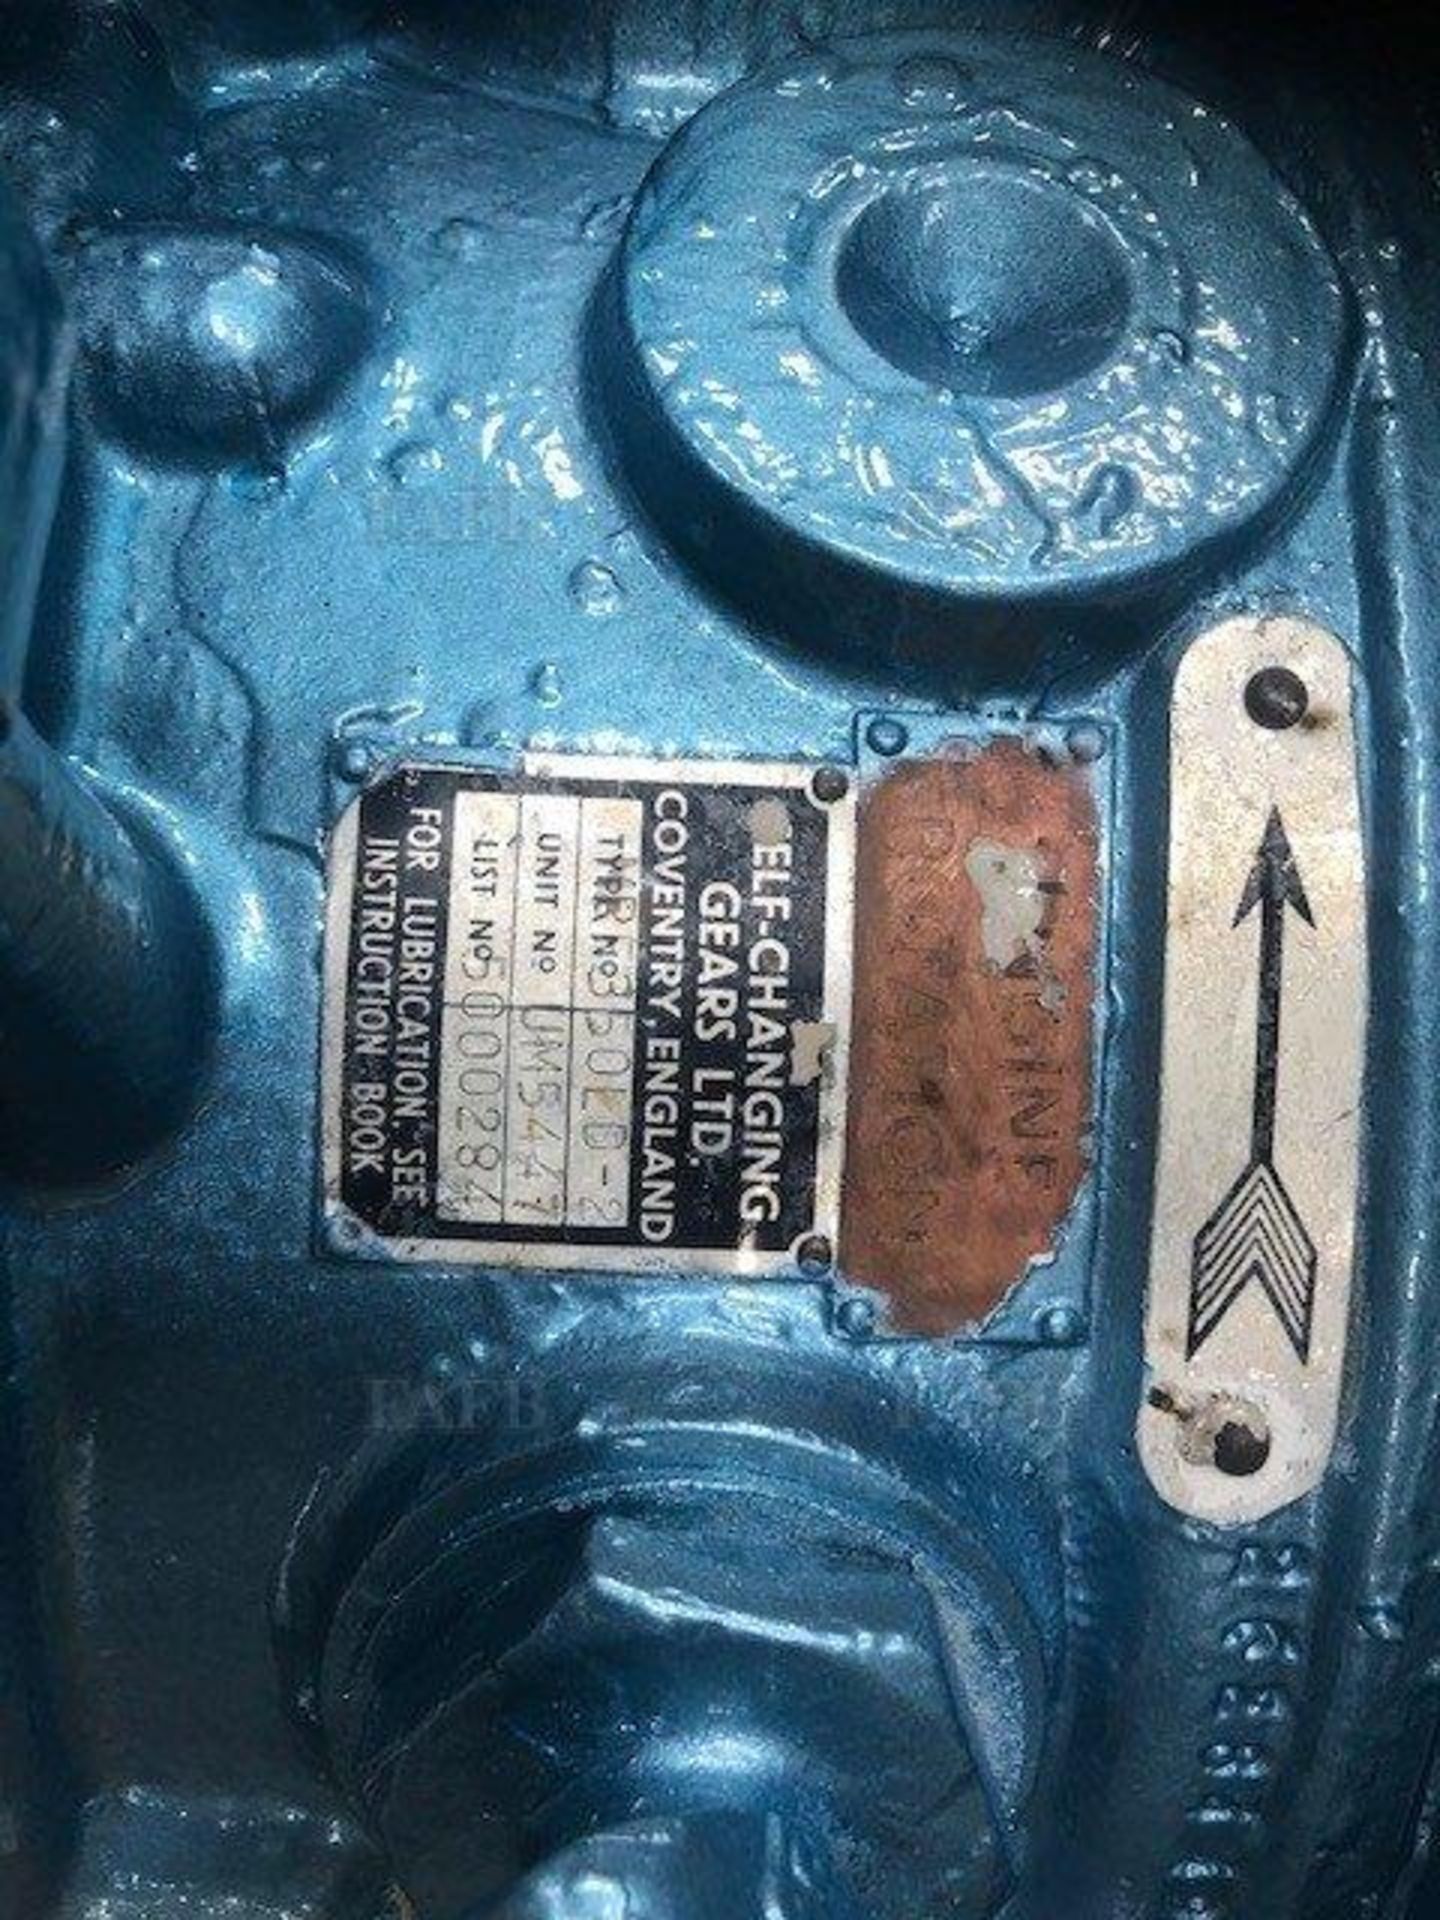 Reconditioned Self Change MR350LD-2 Marine Gearbox: ratio 2:1 - Image 5 of 5